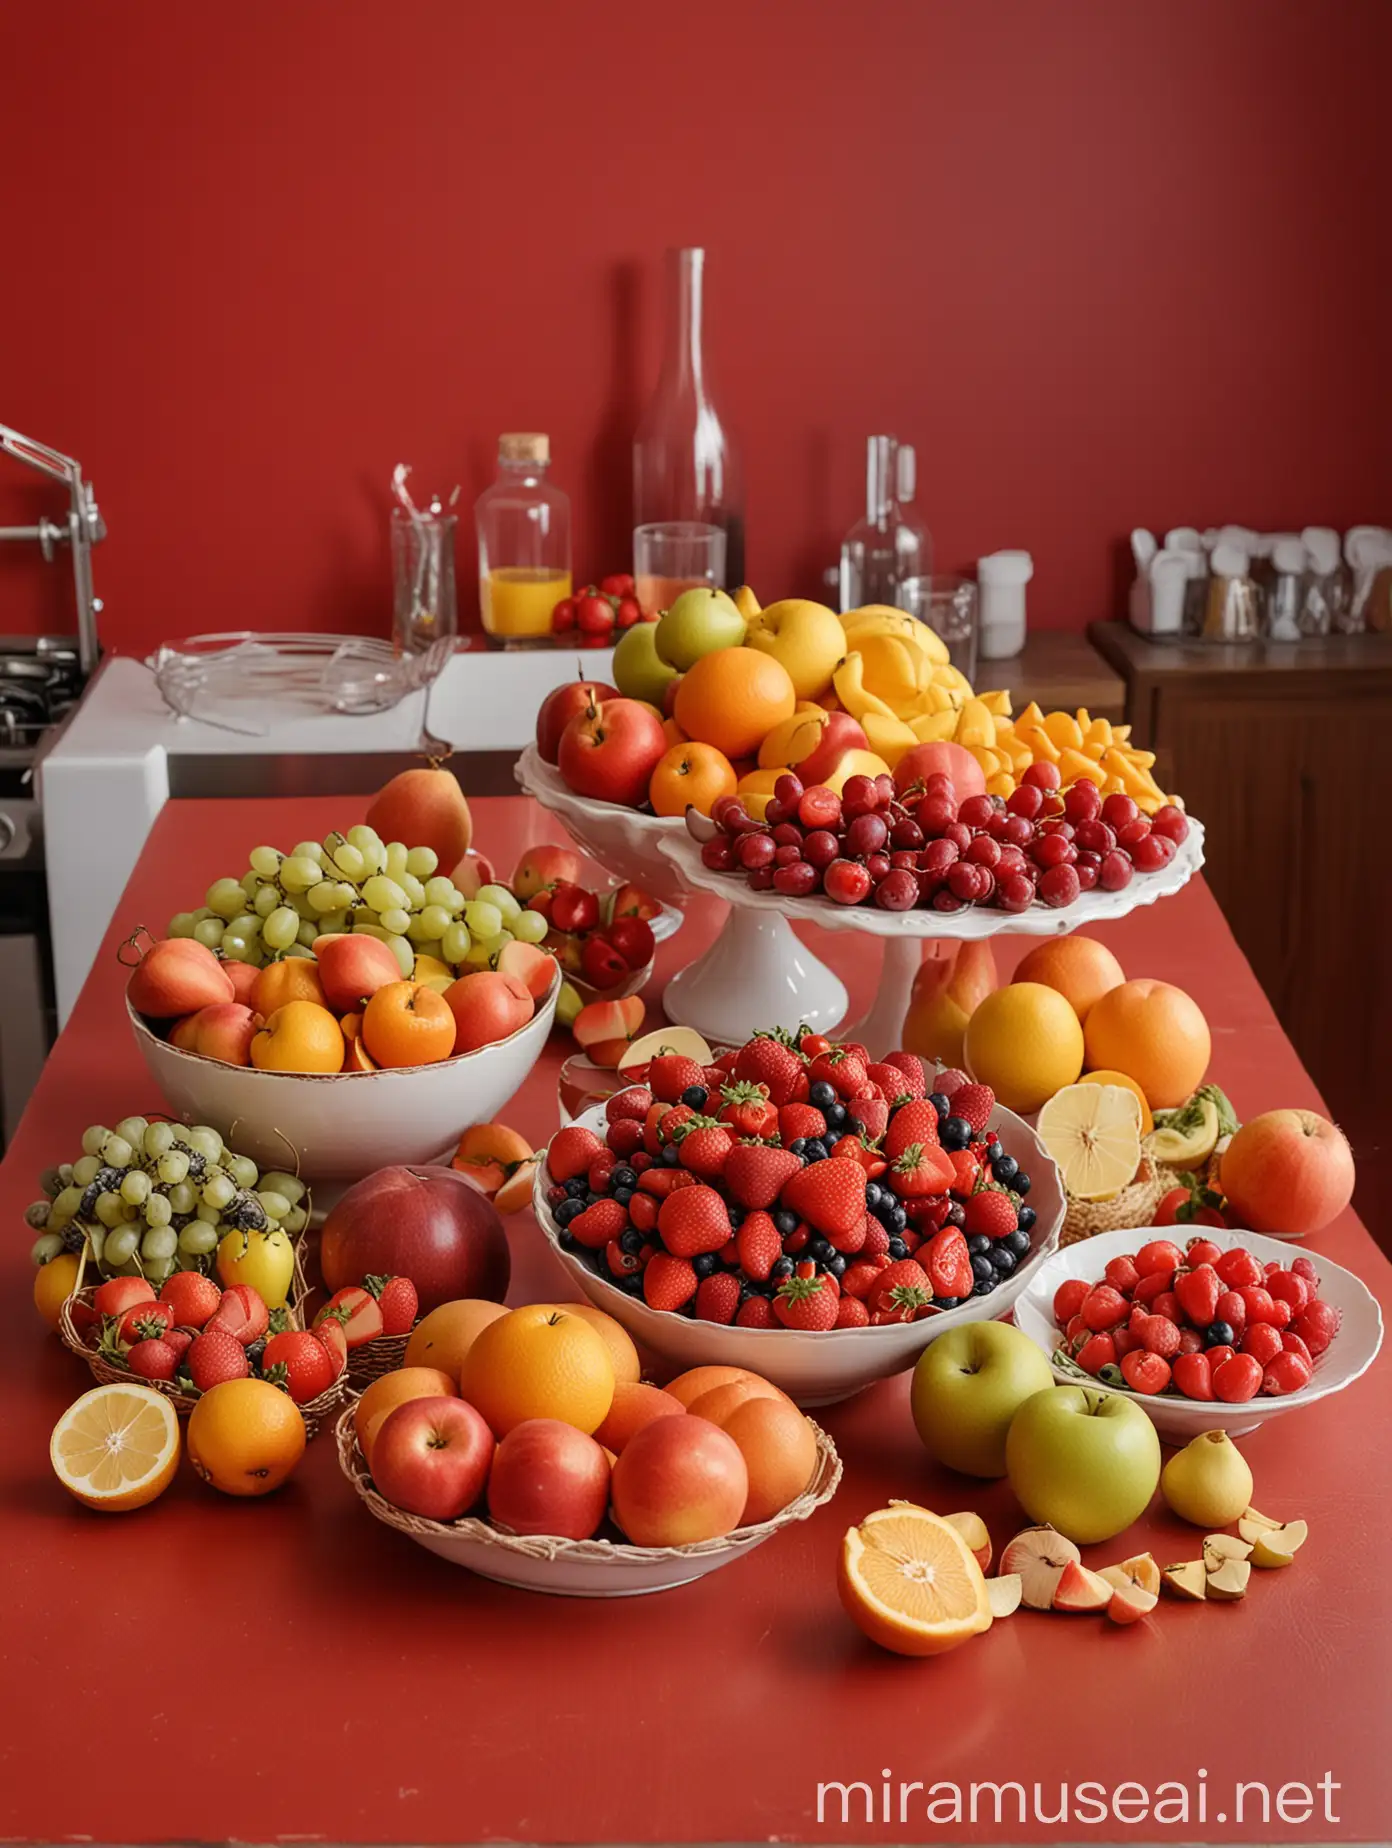 Dining table in a kitchen, close-up, many assorted fruits on the kitchen table, red background